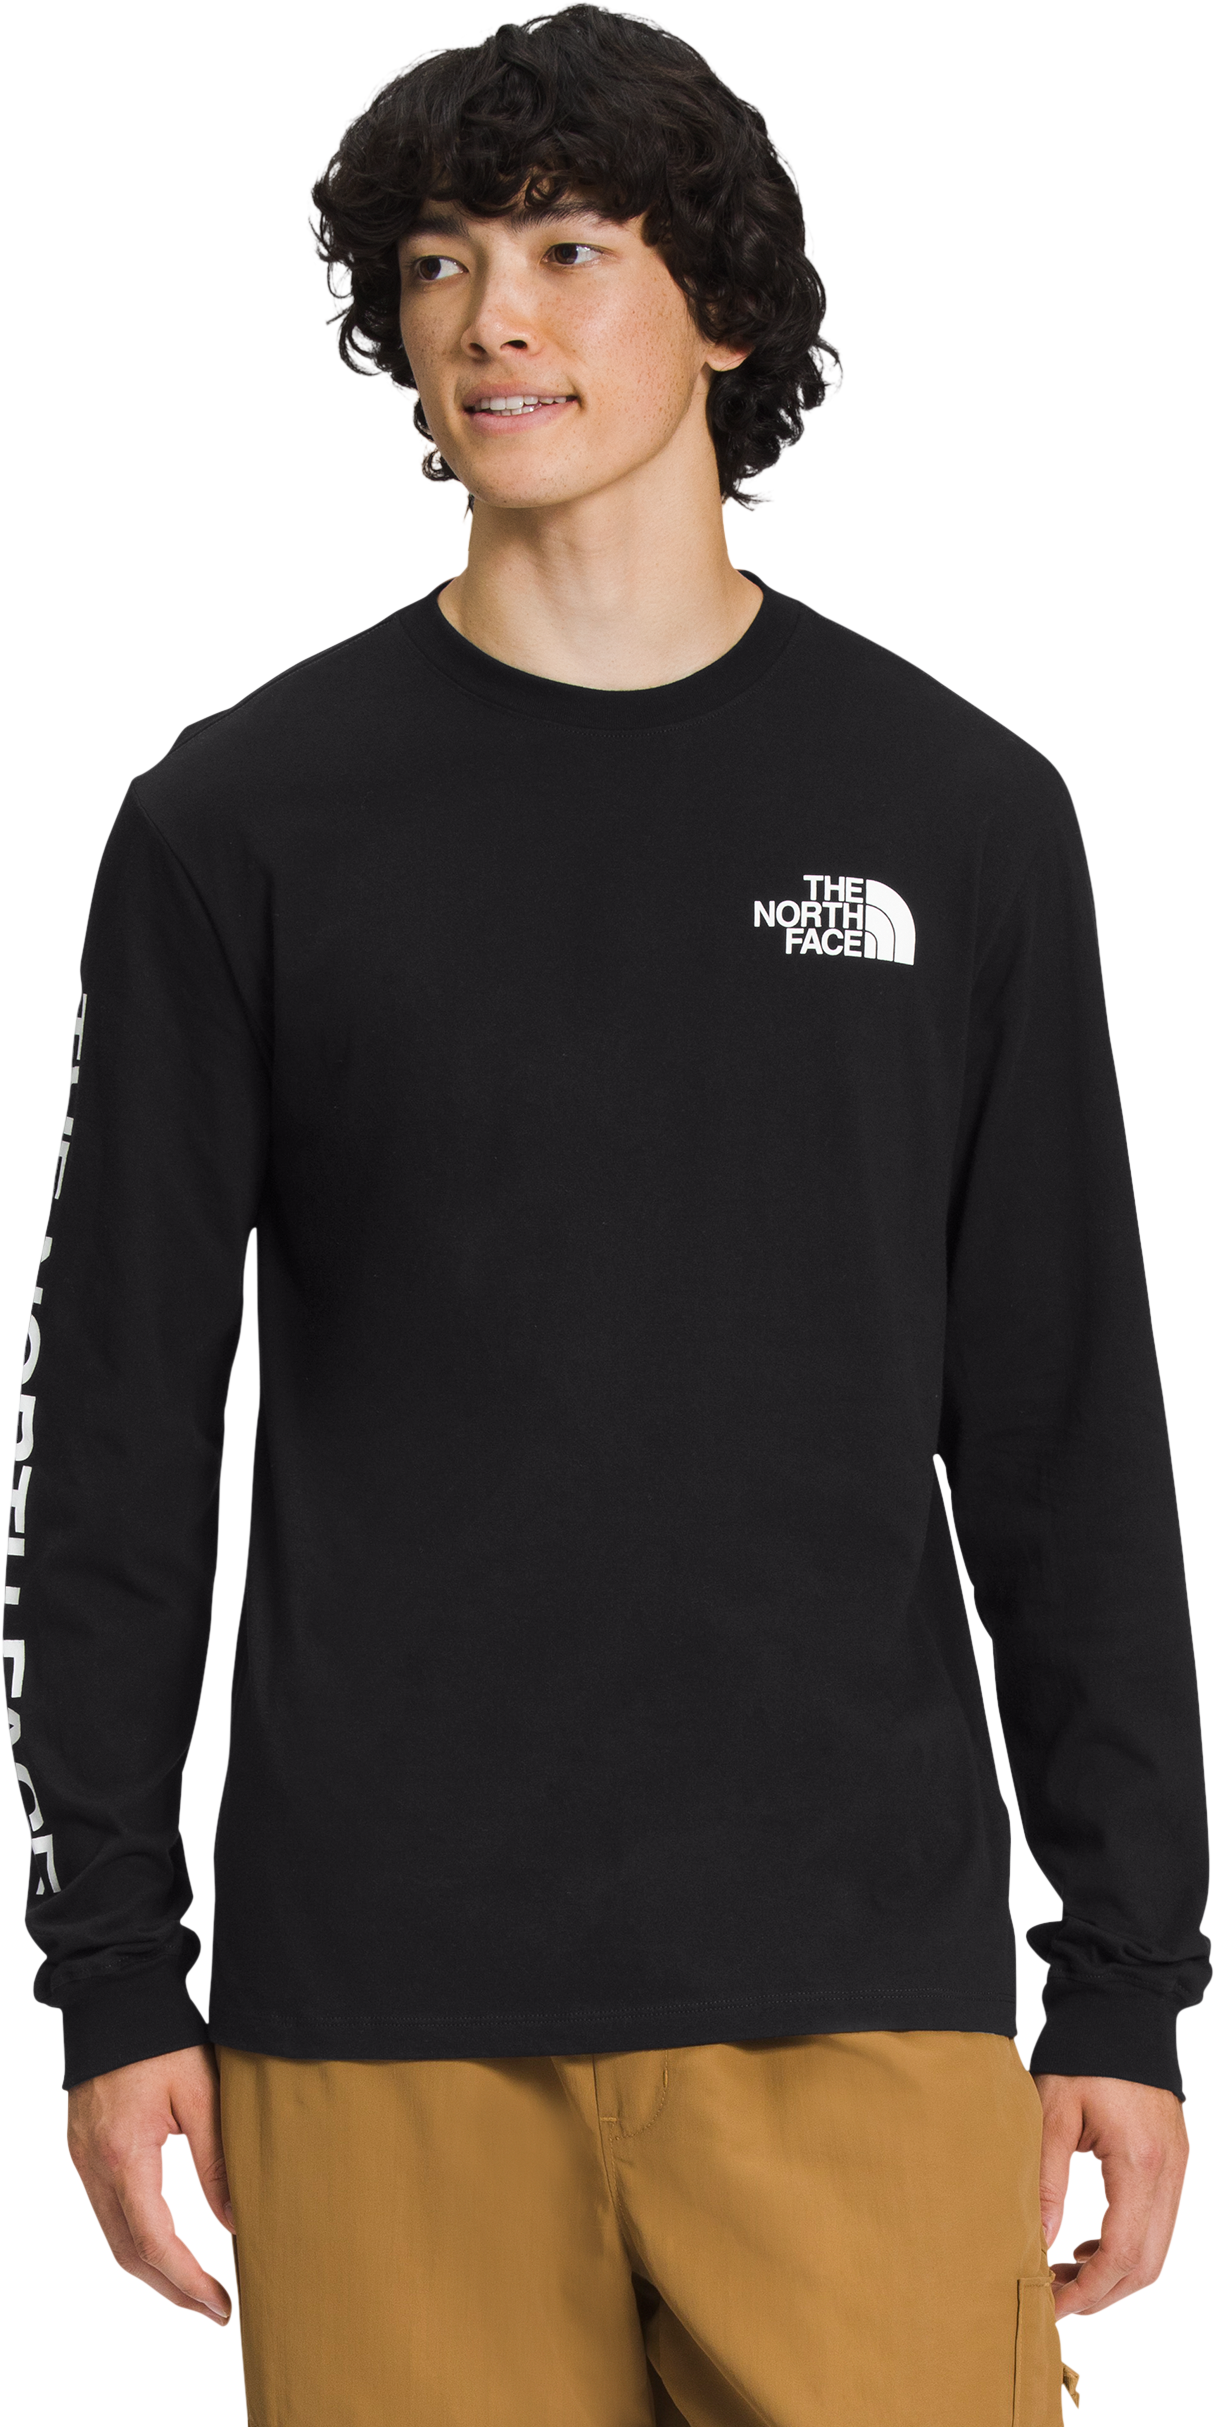 The North Face Hit Graphic Long-Sleeve T-Shirt for Men - TNF Black/TNF White - L